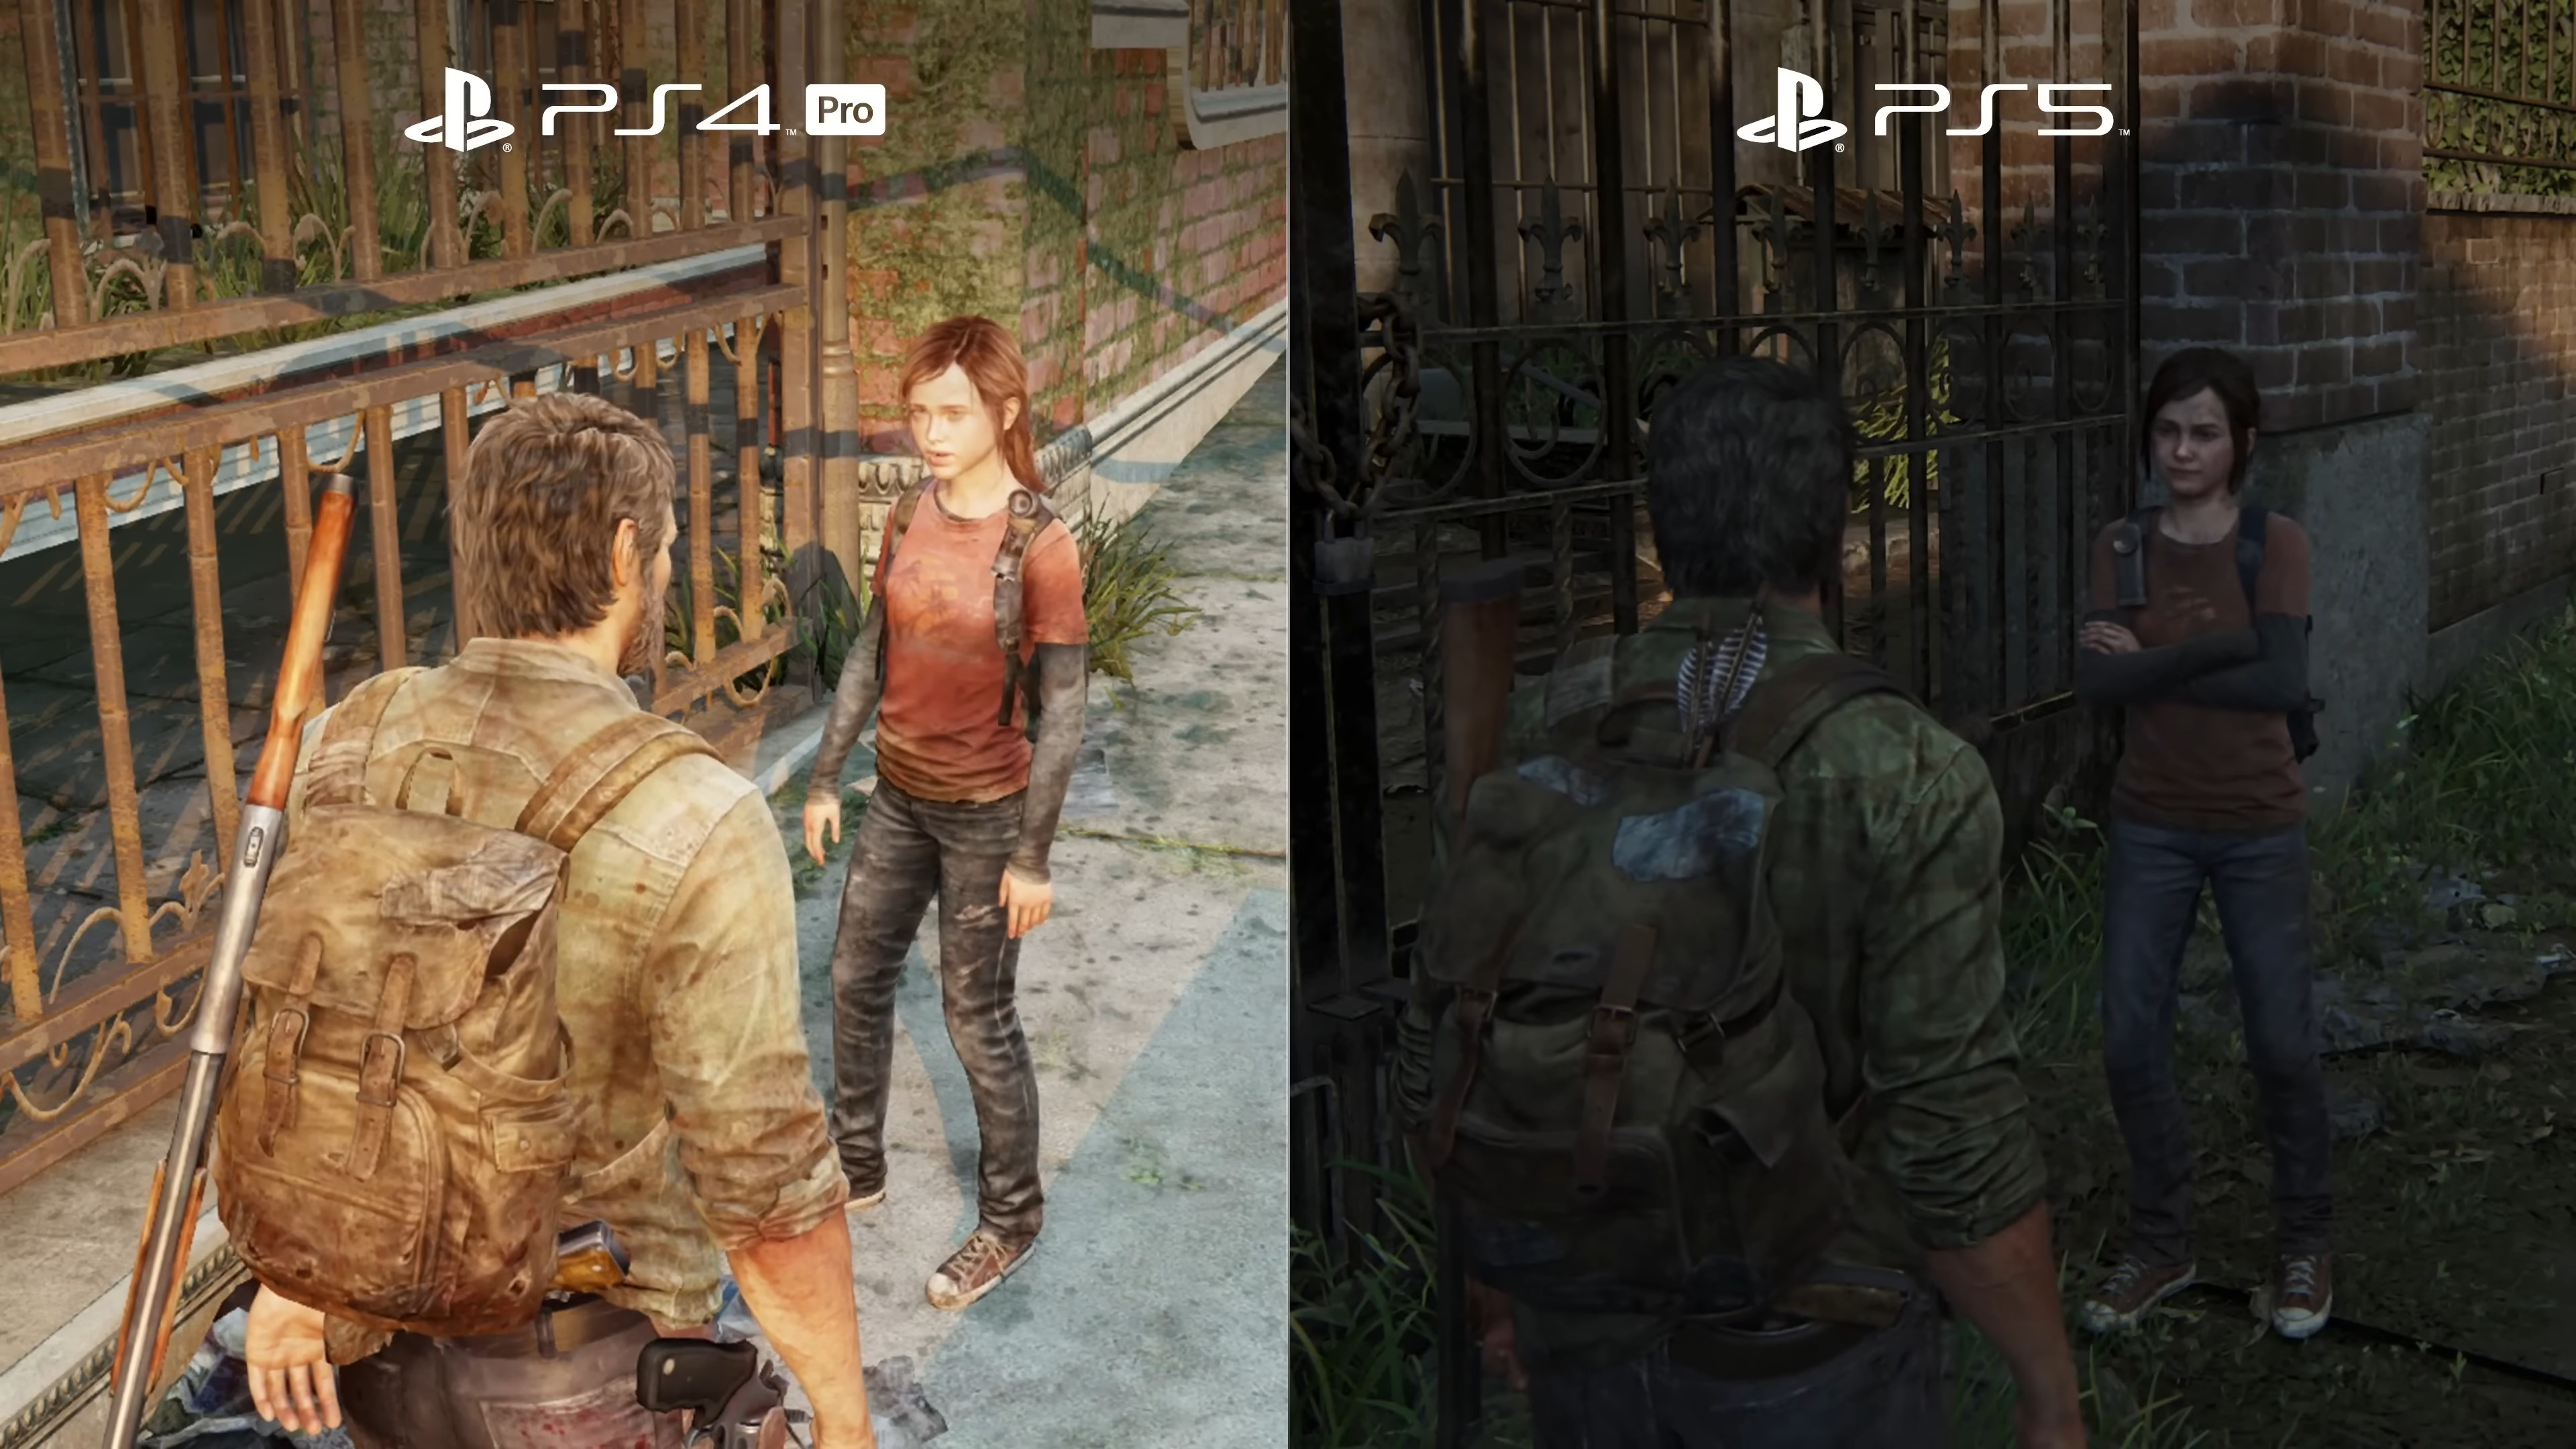 Last of us part 1 ps5. The last of us 1 Remake.